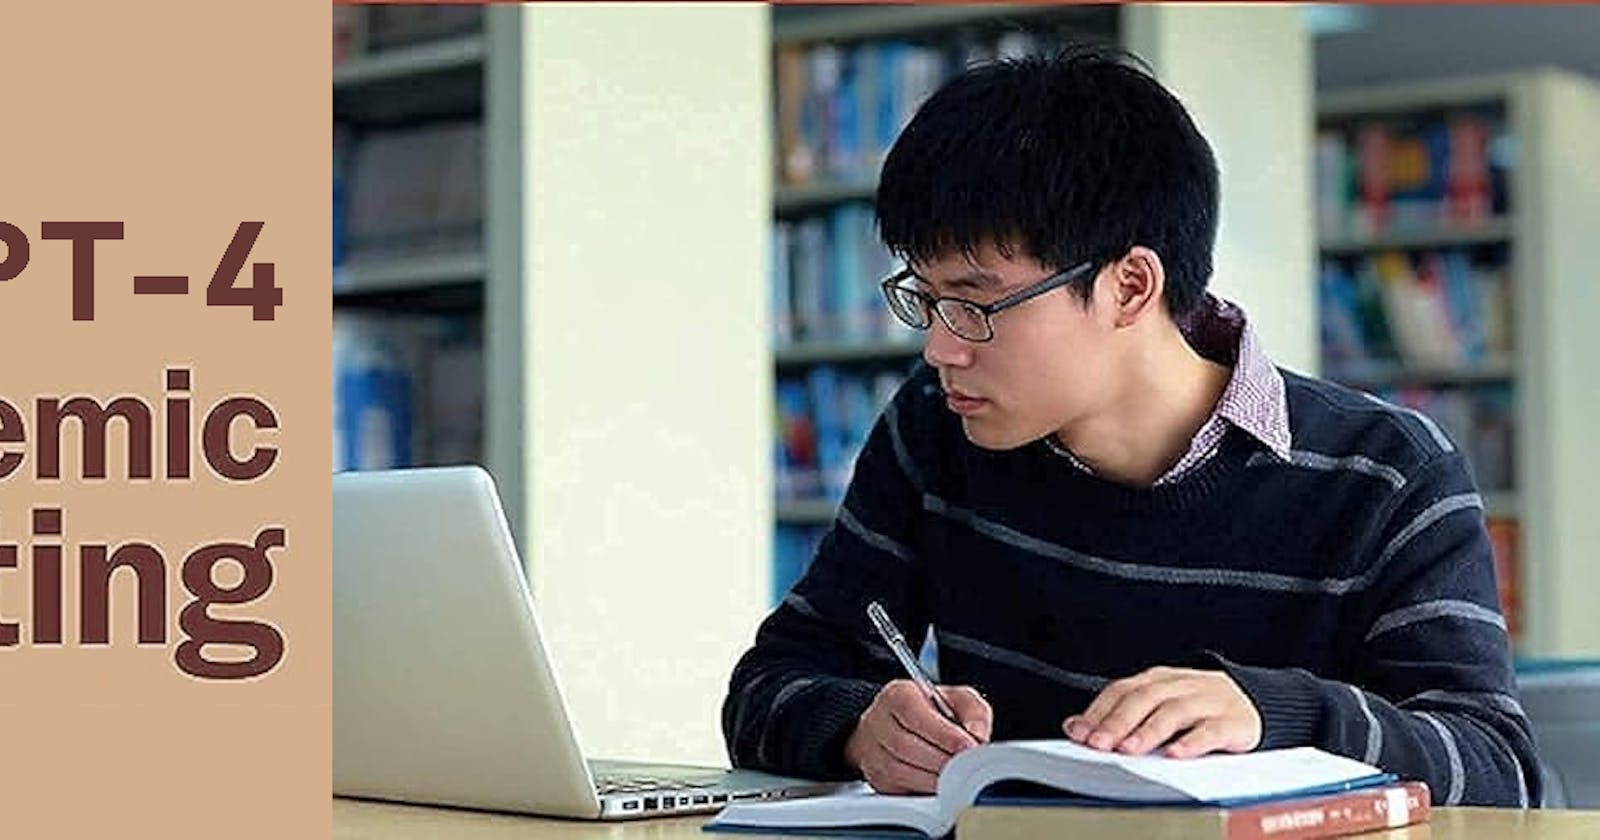 Effective strategies to using ChatGPT4 for research and academic essays